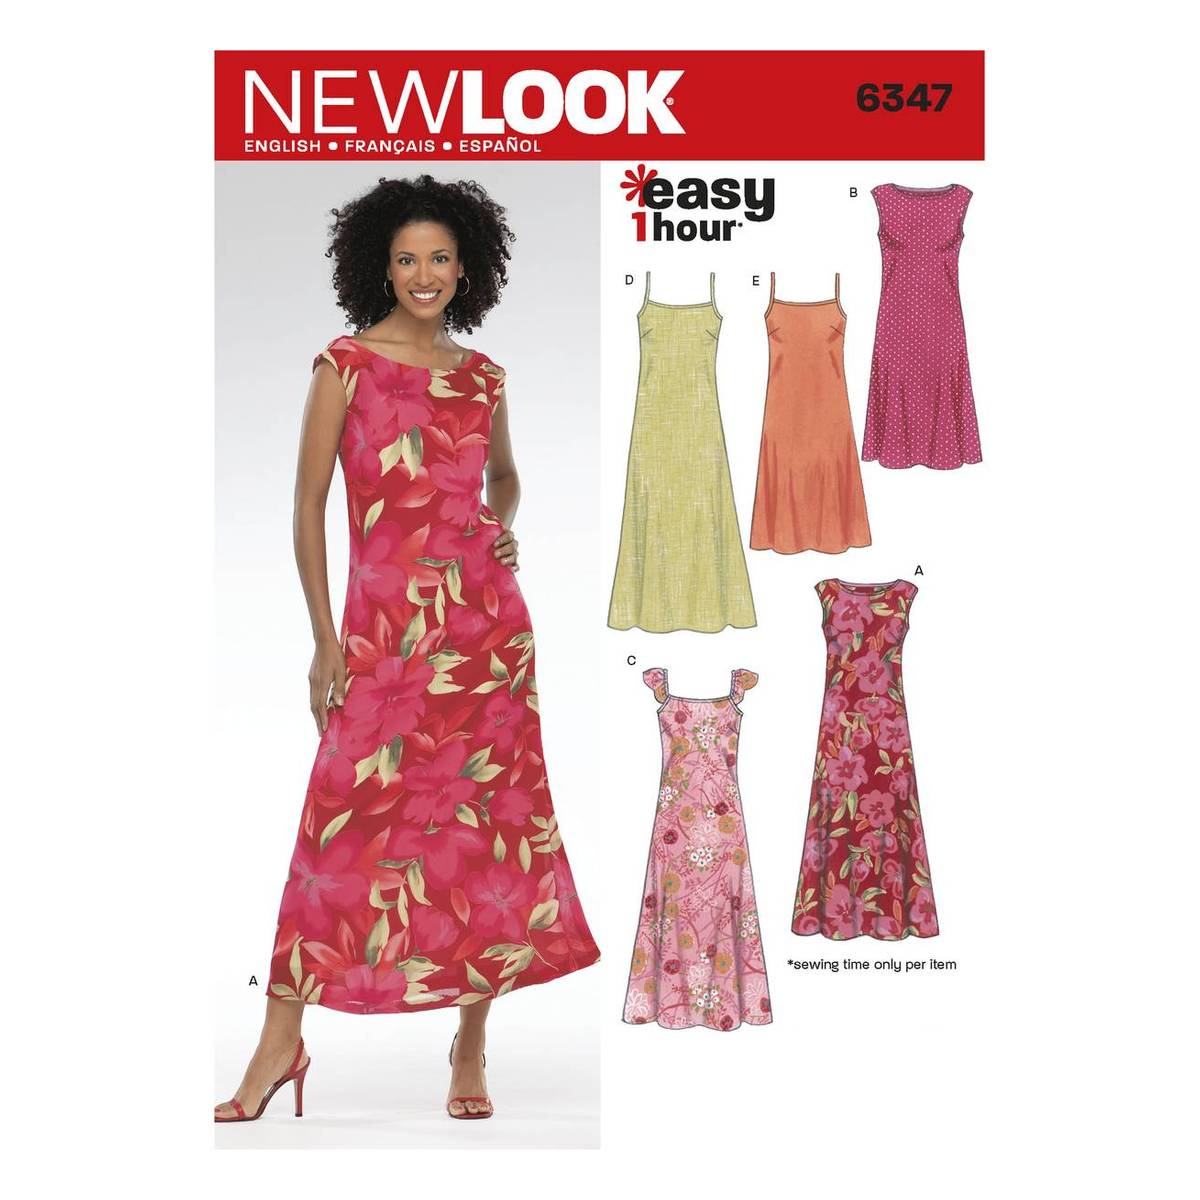 Amazon.com: Simplicity New Look Pattern D0611/6372 Misses Dress with  Variations Size 6-18 : Arts, Crafts & Sewing